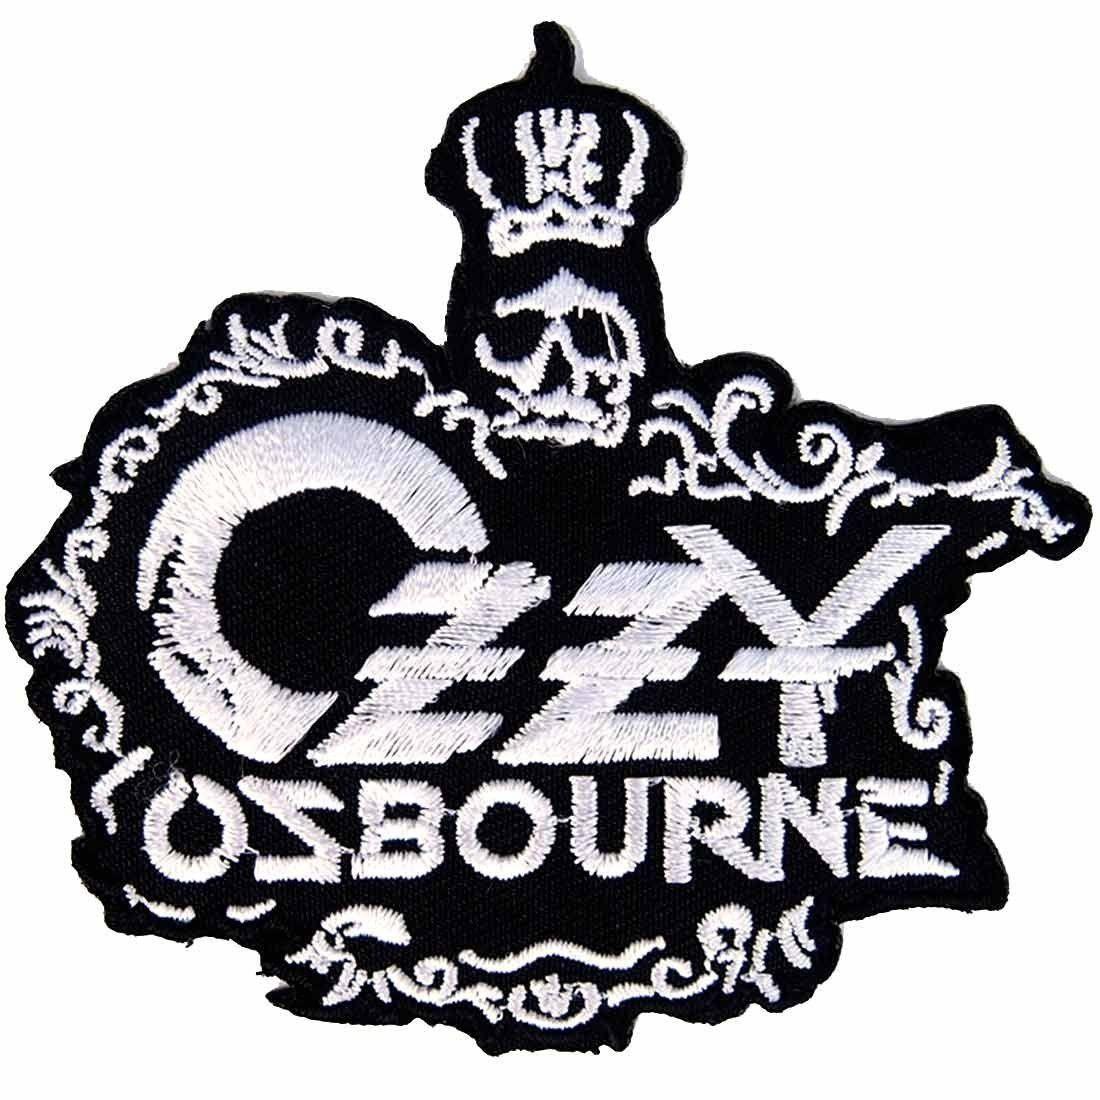 Ozzy Band Logo - Buy Ozzy Osbourne Fist Logo Rock Roll Music Band Embroidered Iron On ...